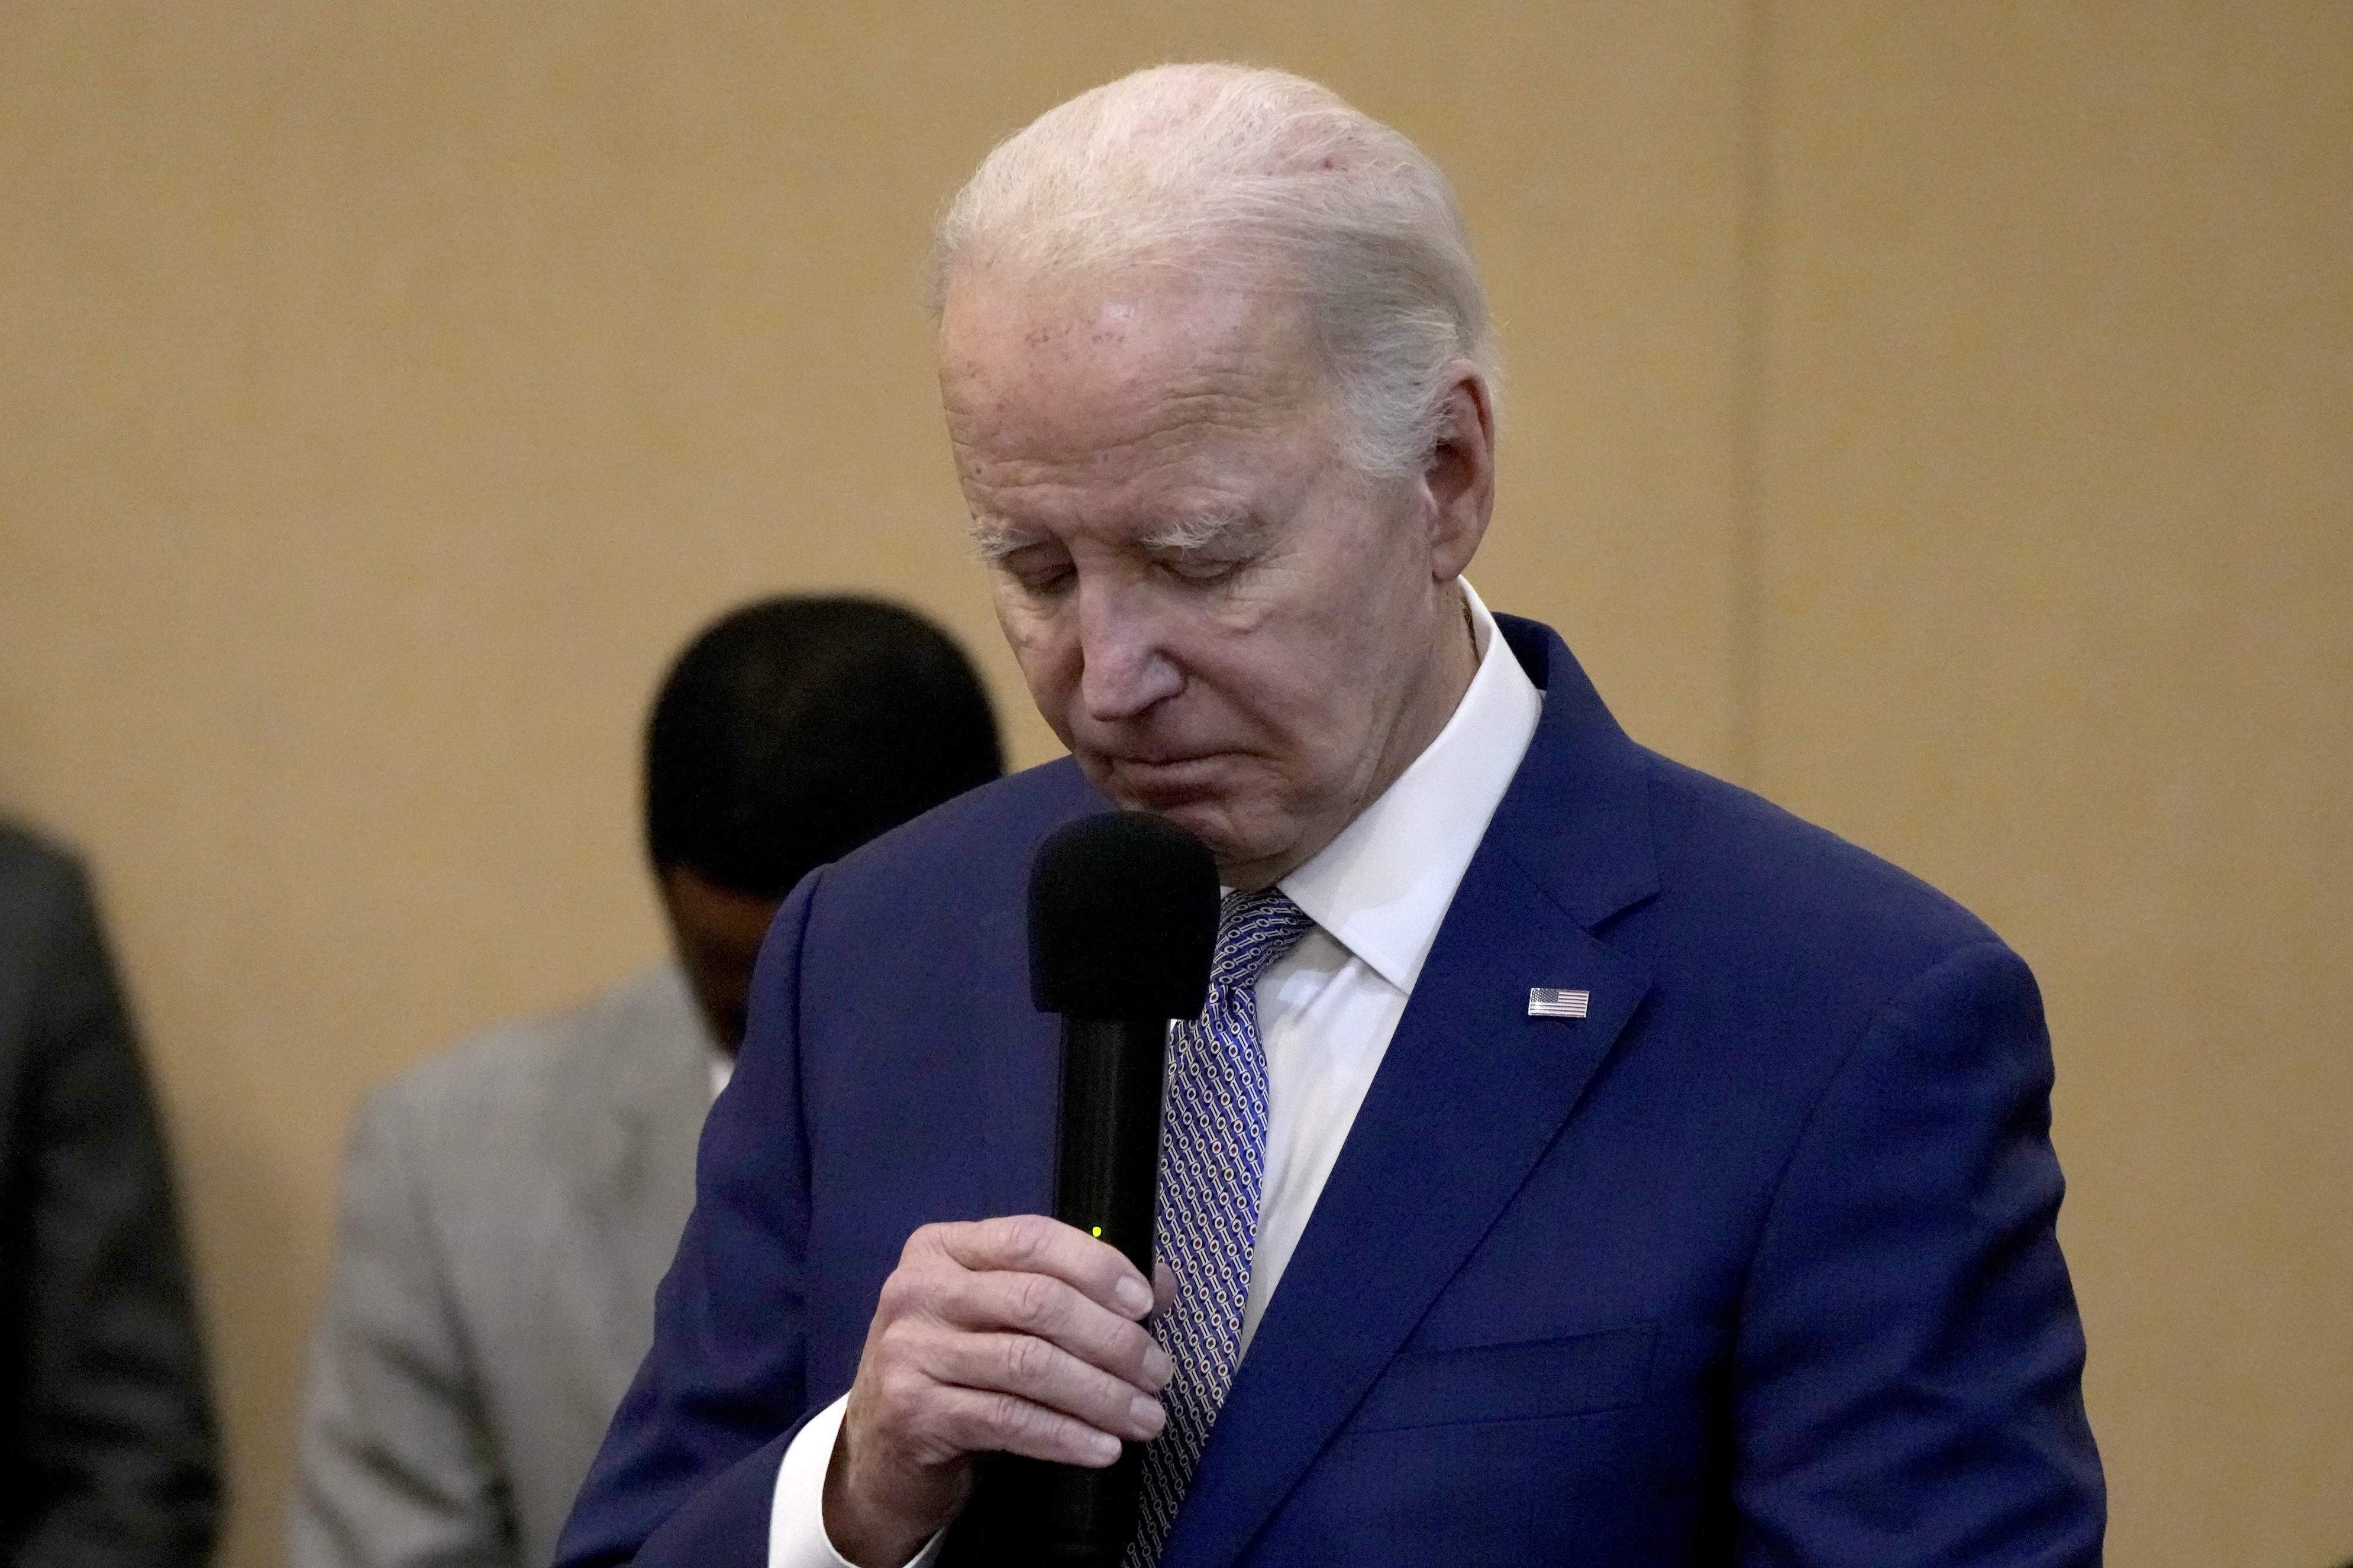 Joe Biden bows his head in a moment of silence for the three American troops killed